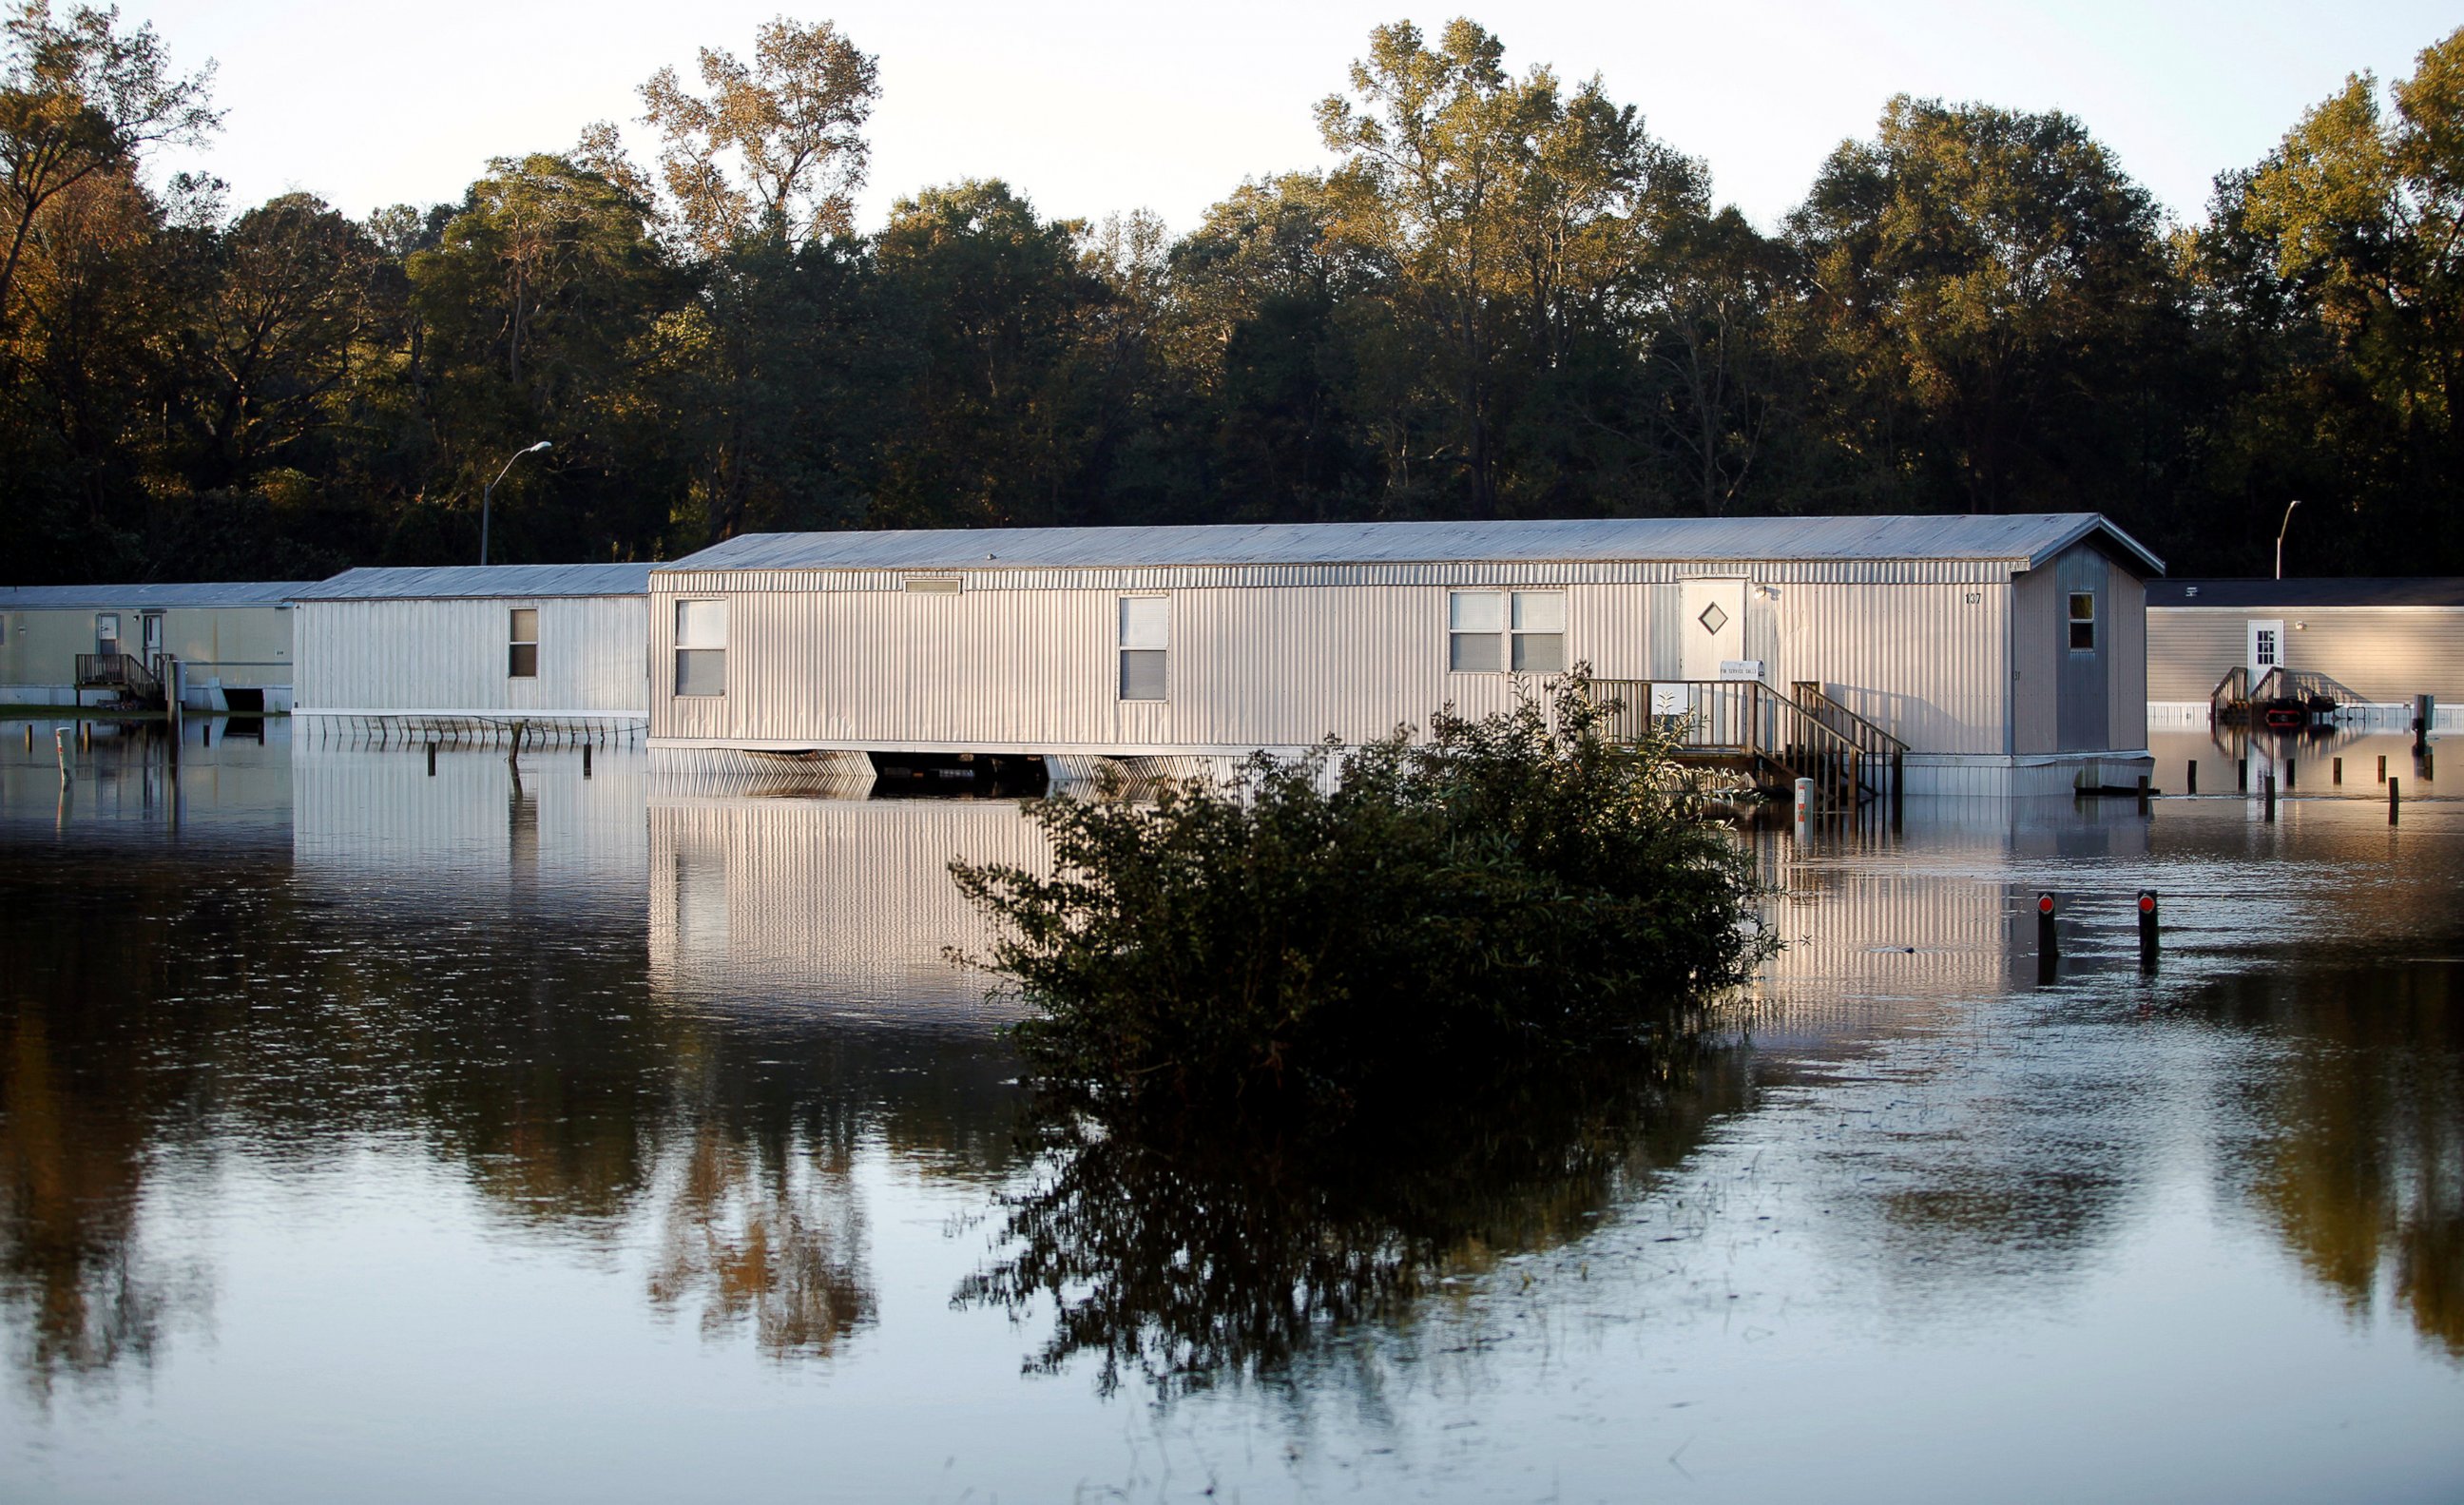 PHOTO: Mobile homes are reflected in the flood waters after Hurricane Matthew caused severe flooding in Goldsboro, North Carolina, Oct. 13, 2016. 